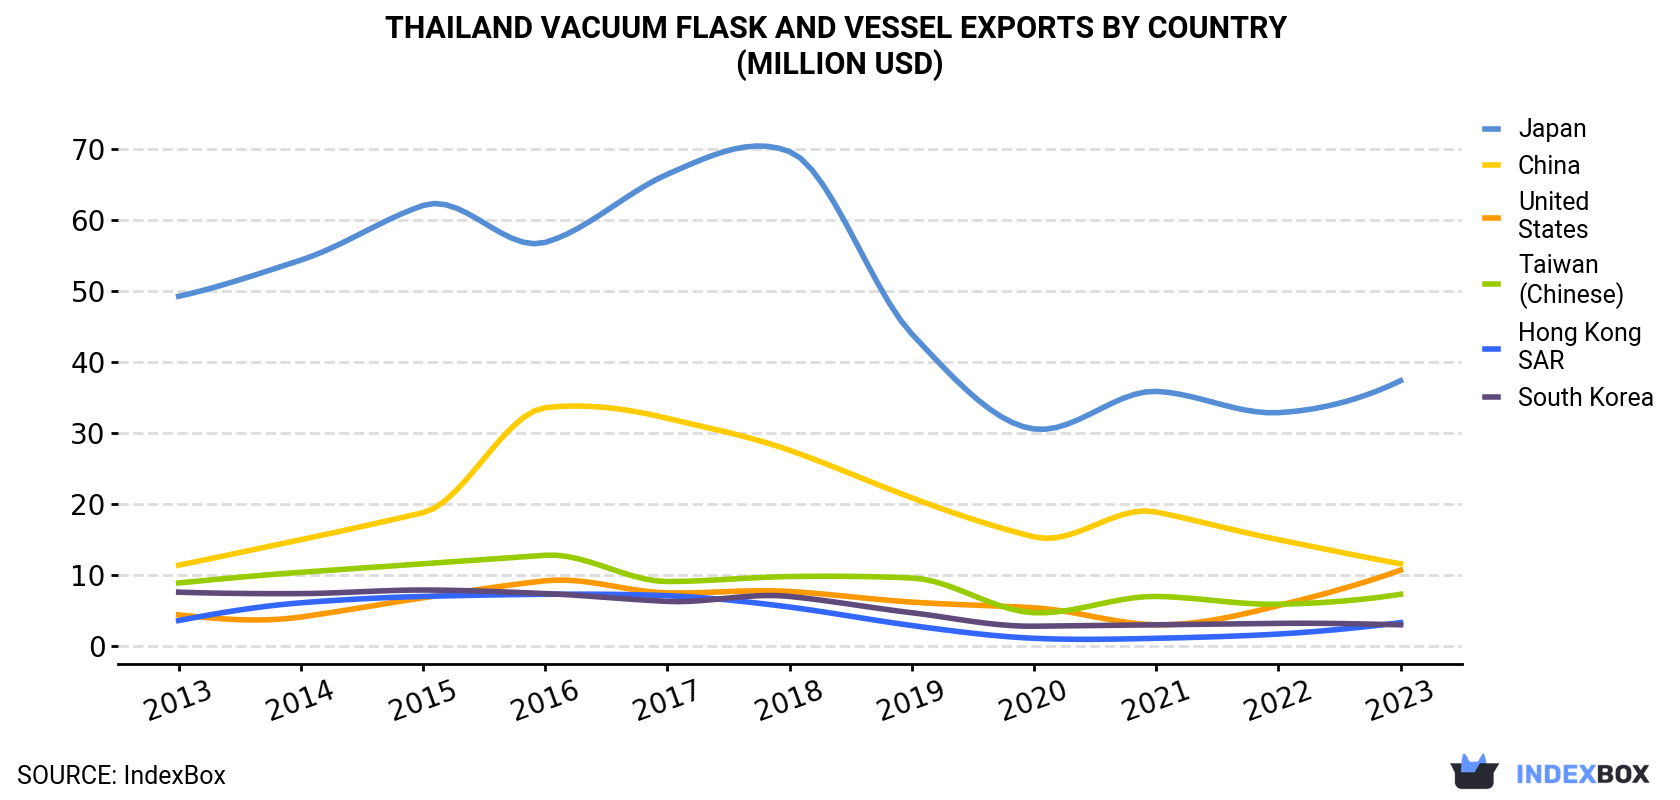 Thailand Vacuum Flask and Vessel Exports By Country (Million USD)